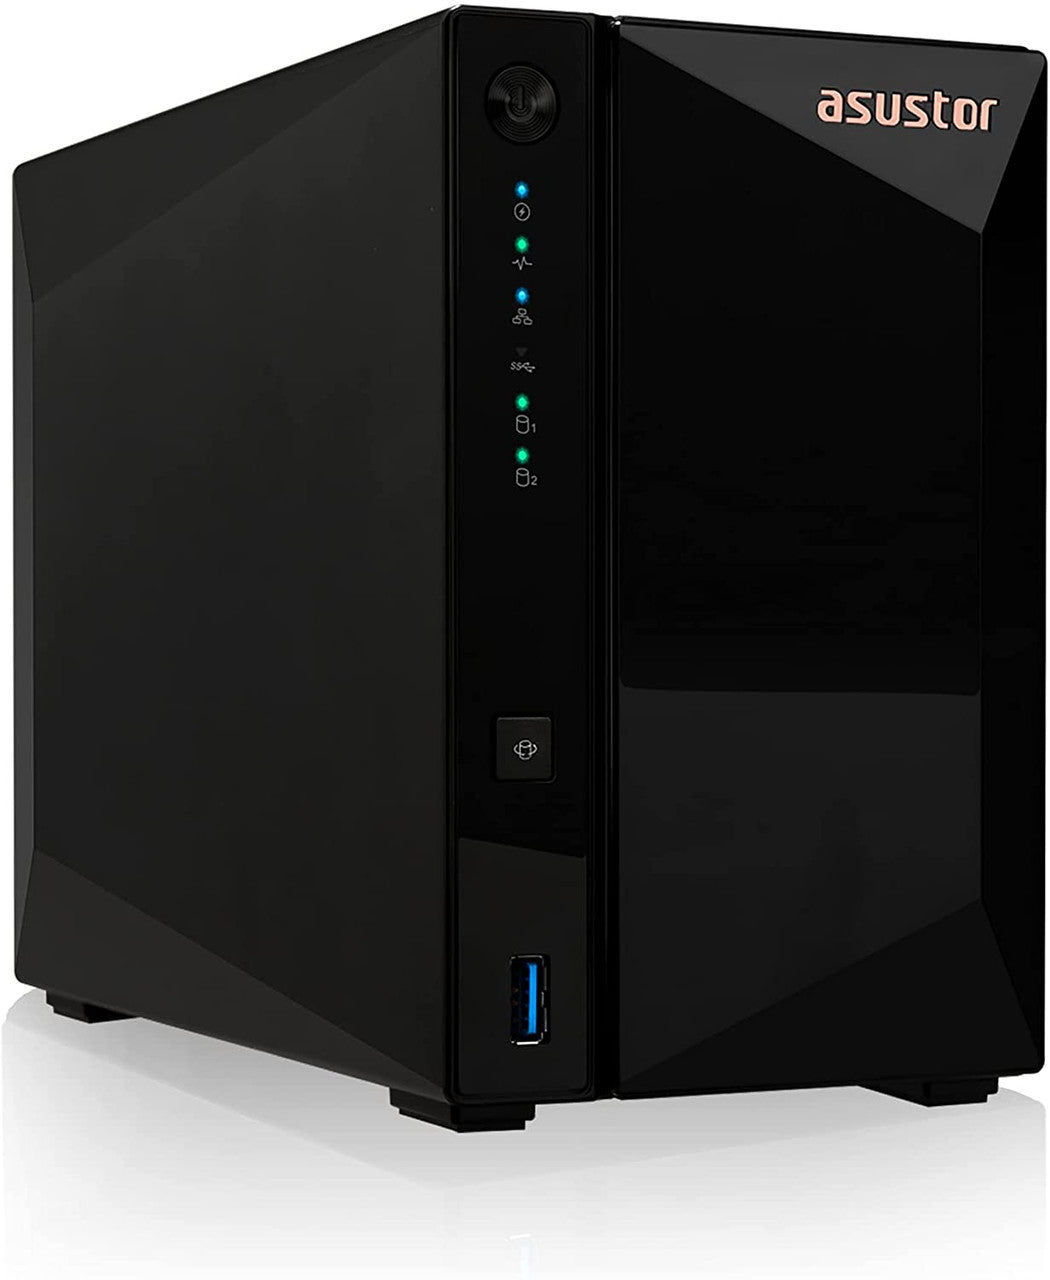 Asustor AS3302T 2-Bay Drivestor 2 PRO NAS with 2GB RAM and 8TB (2x4TB) Western Digital RED Plus Drives Fully Assembled and Tested